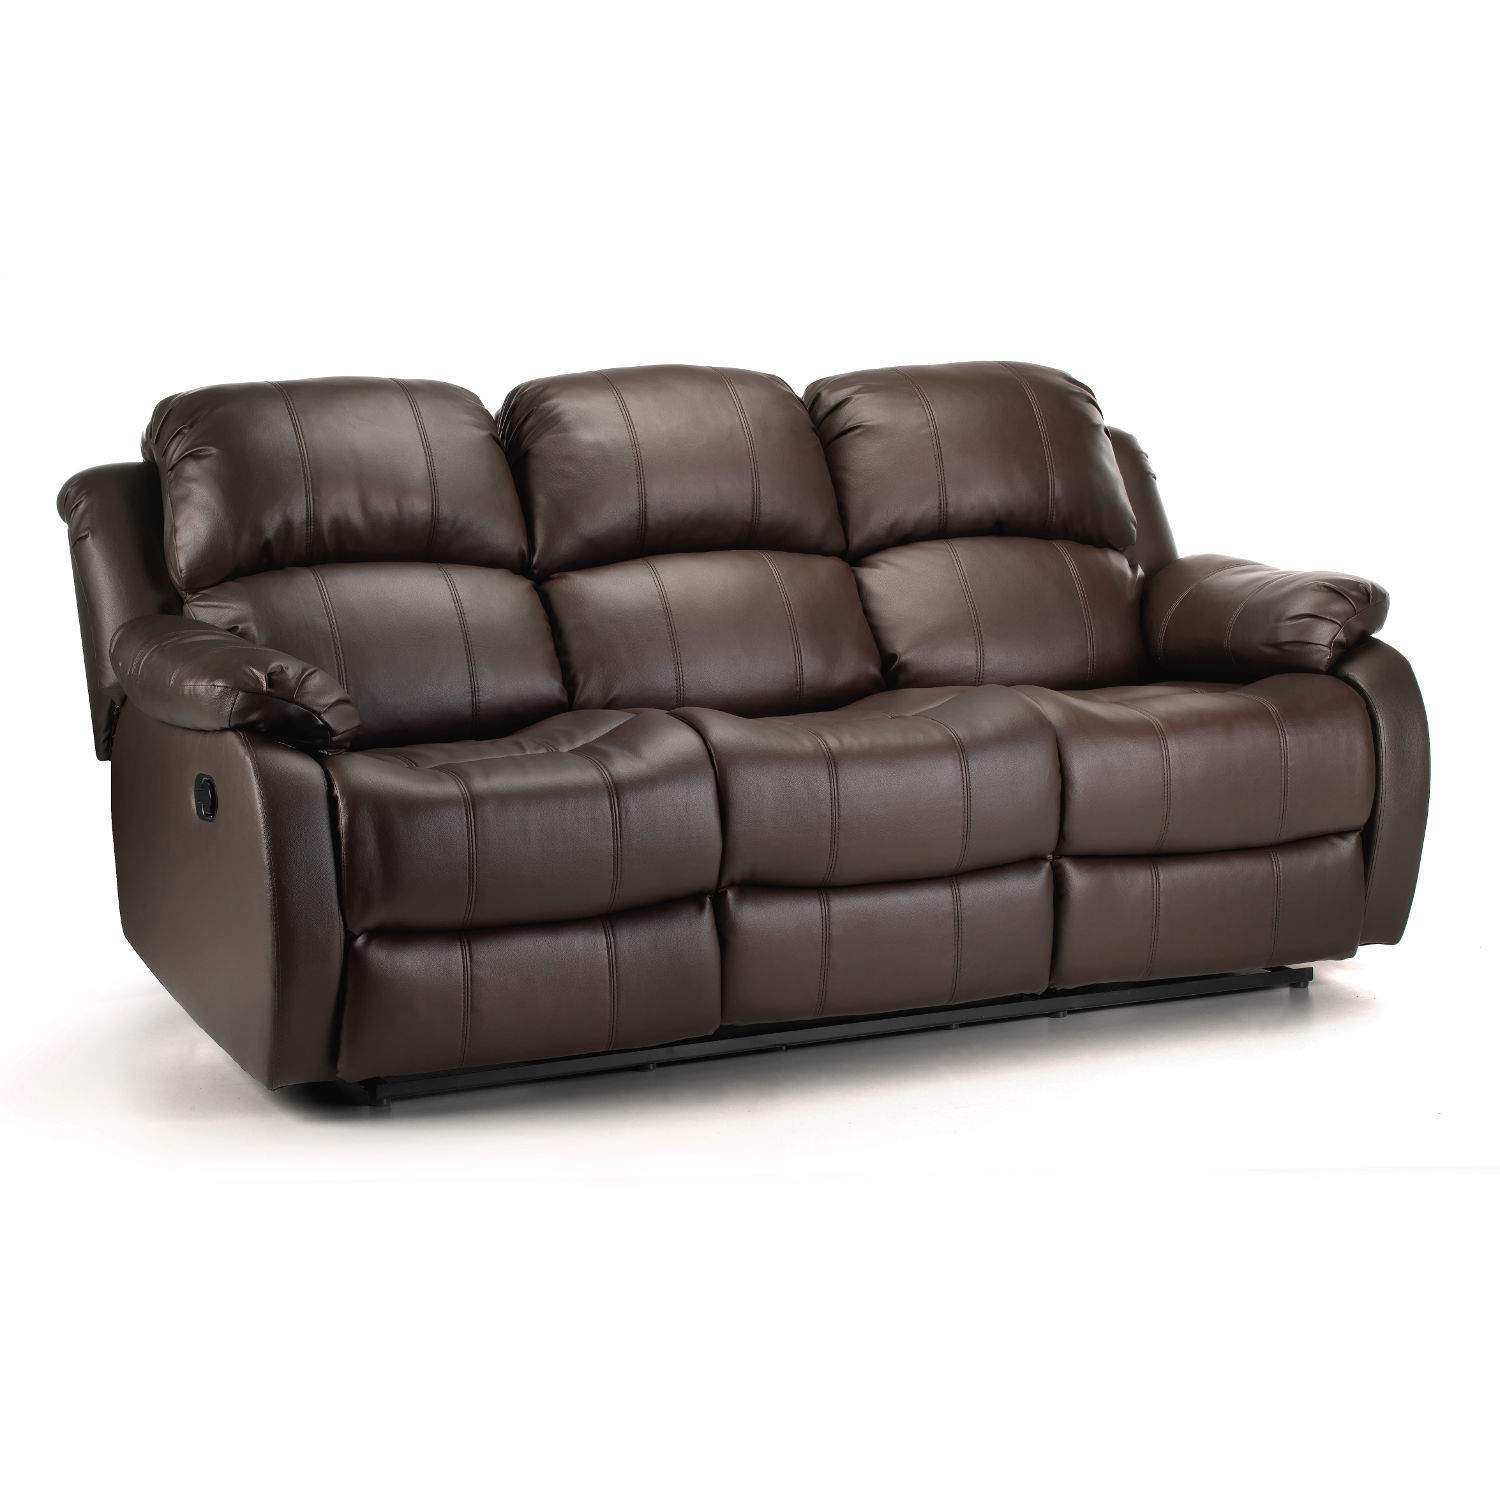 Elegant ... Reclining Leather 3 Seater Sofa. Hover to Zoom | Play Video 3 seater recliner leather sofa